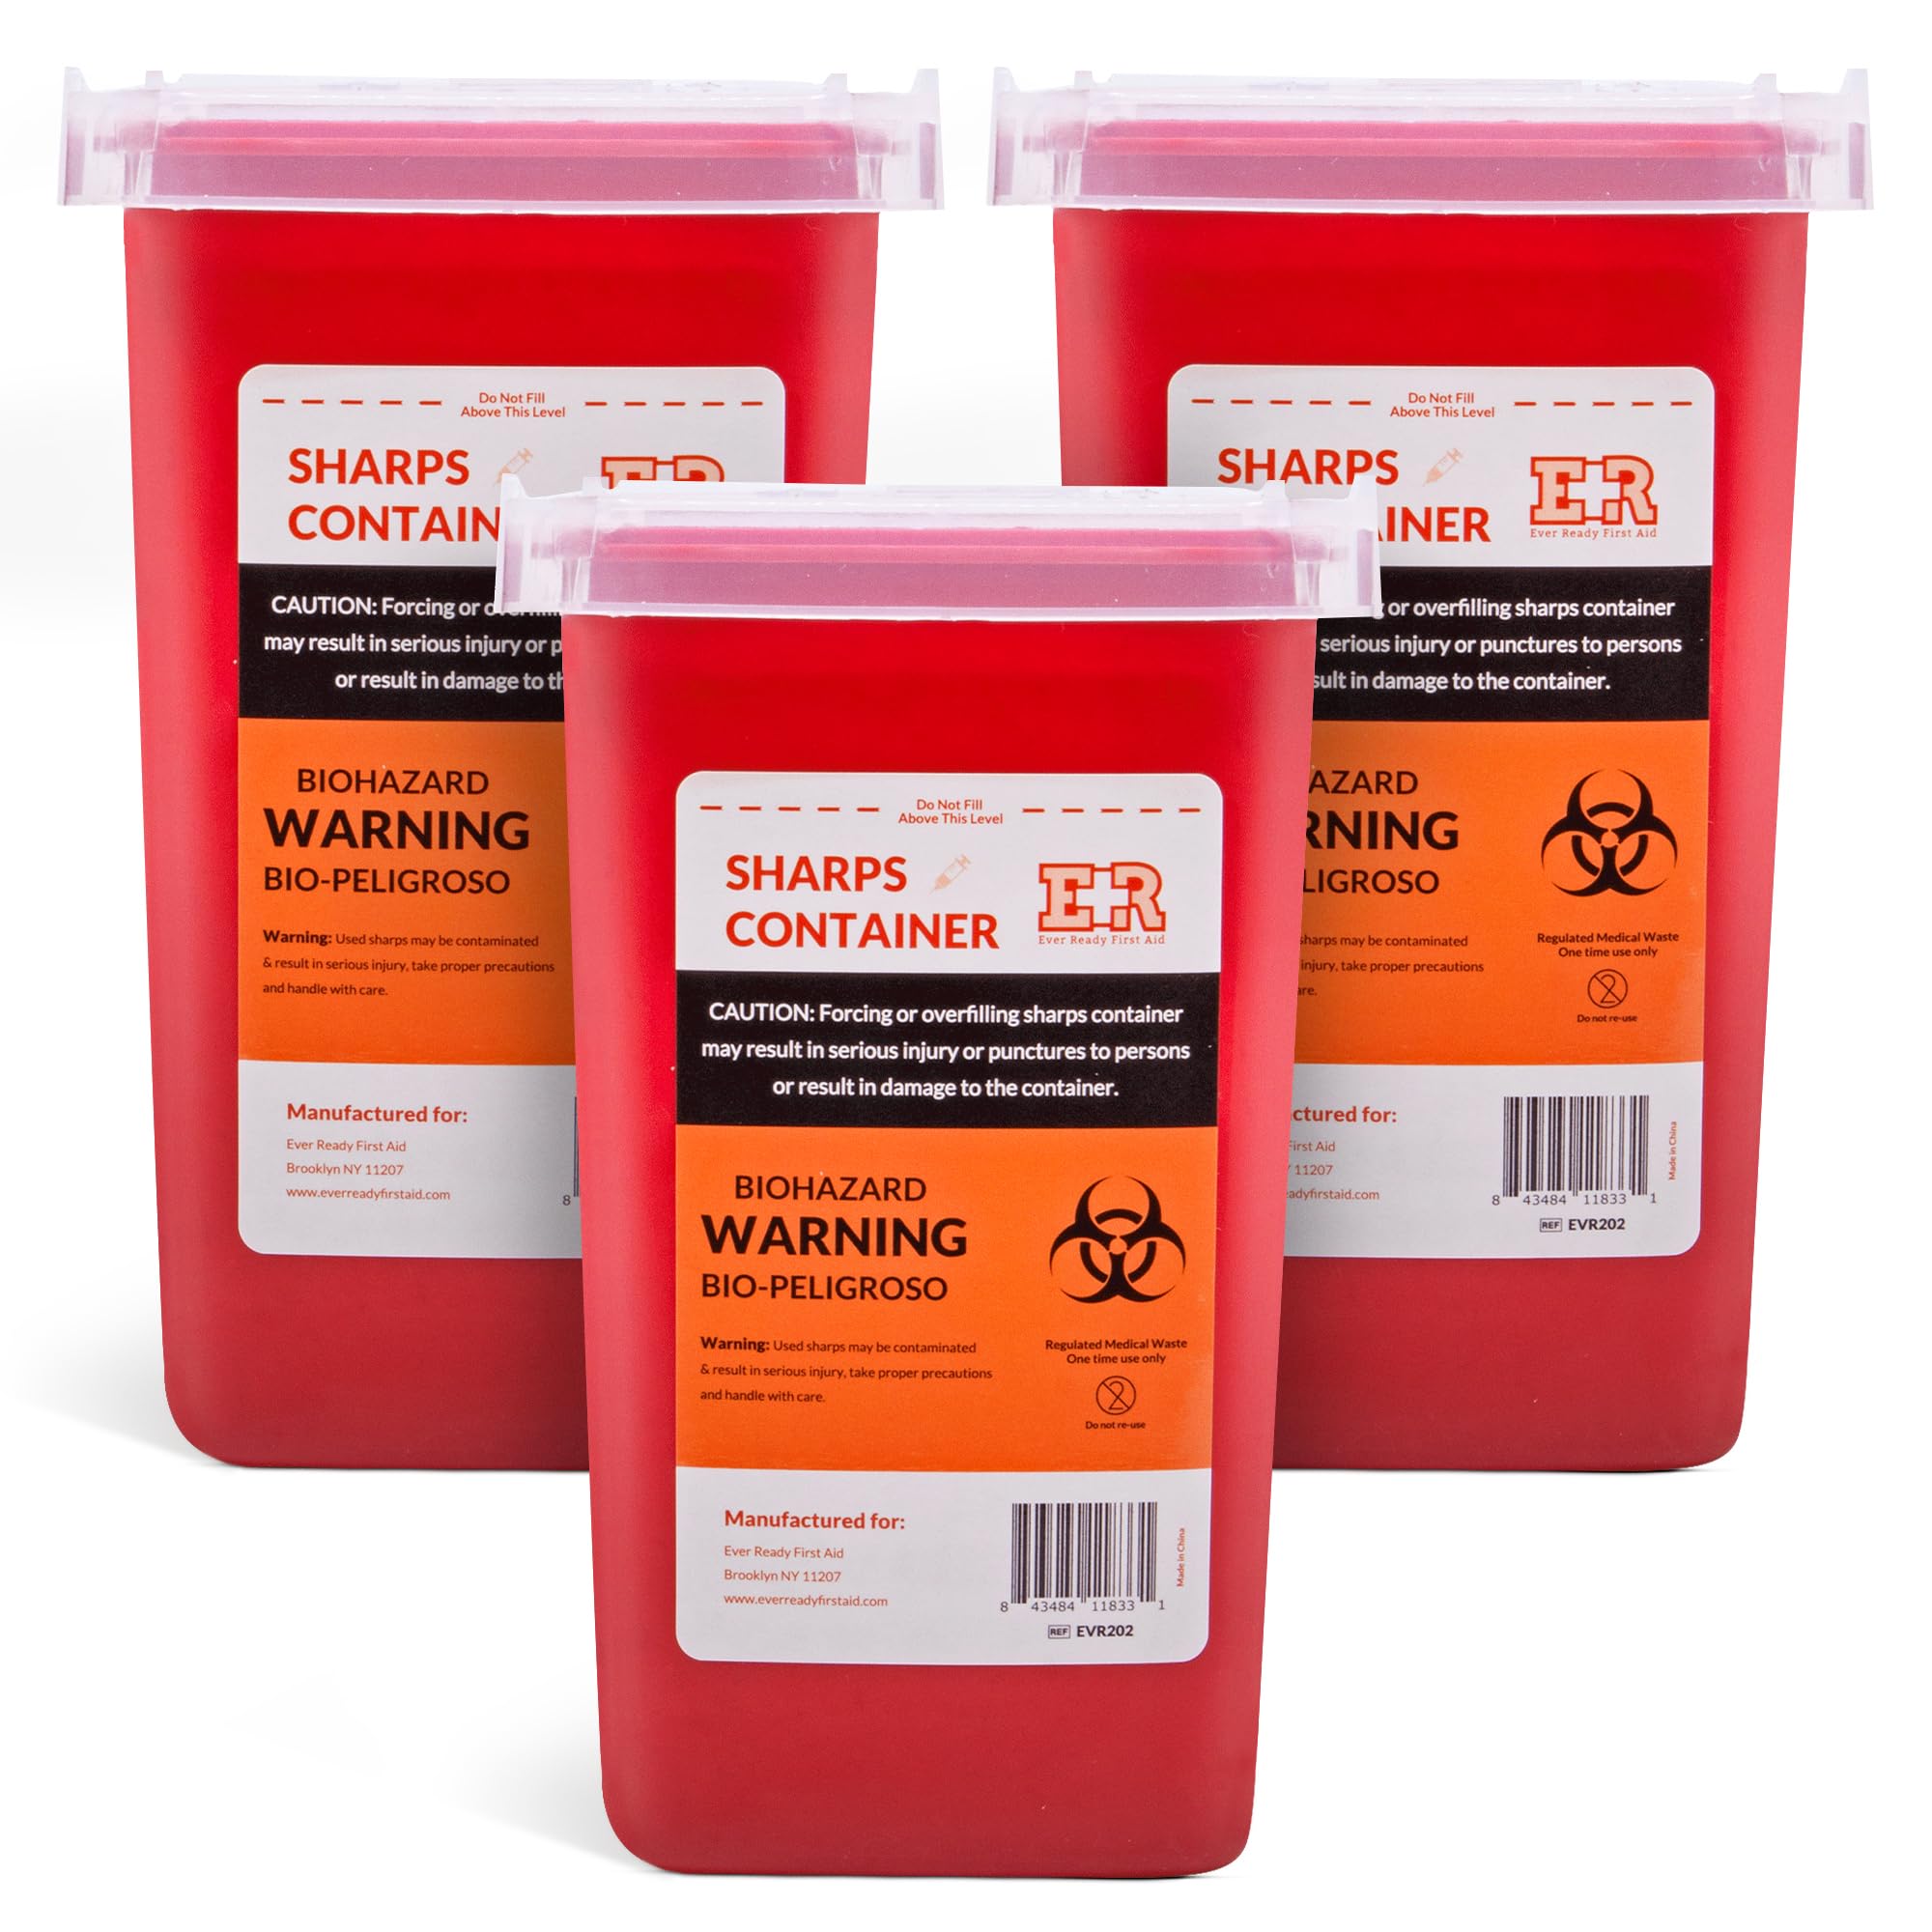 Ever Ready First Aid Sharps Container with Split Lid Design and Locking Mechanism for Sharp Waste Disposal, 1 Quart - 3 Count